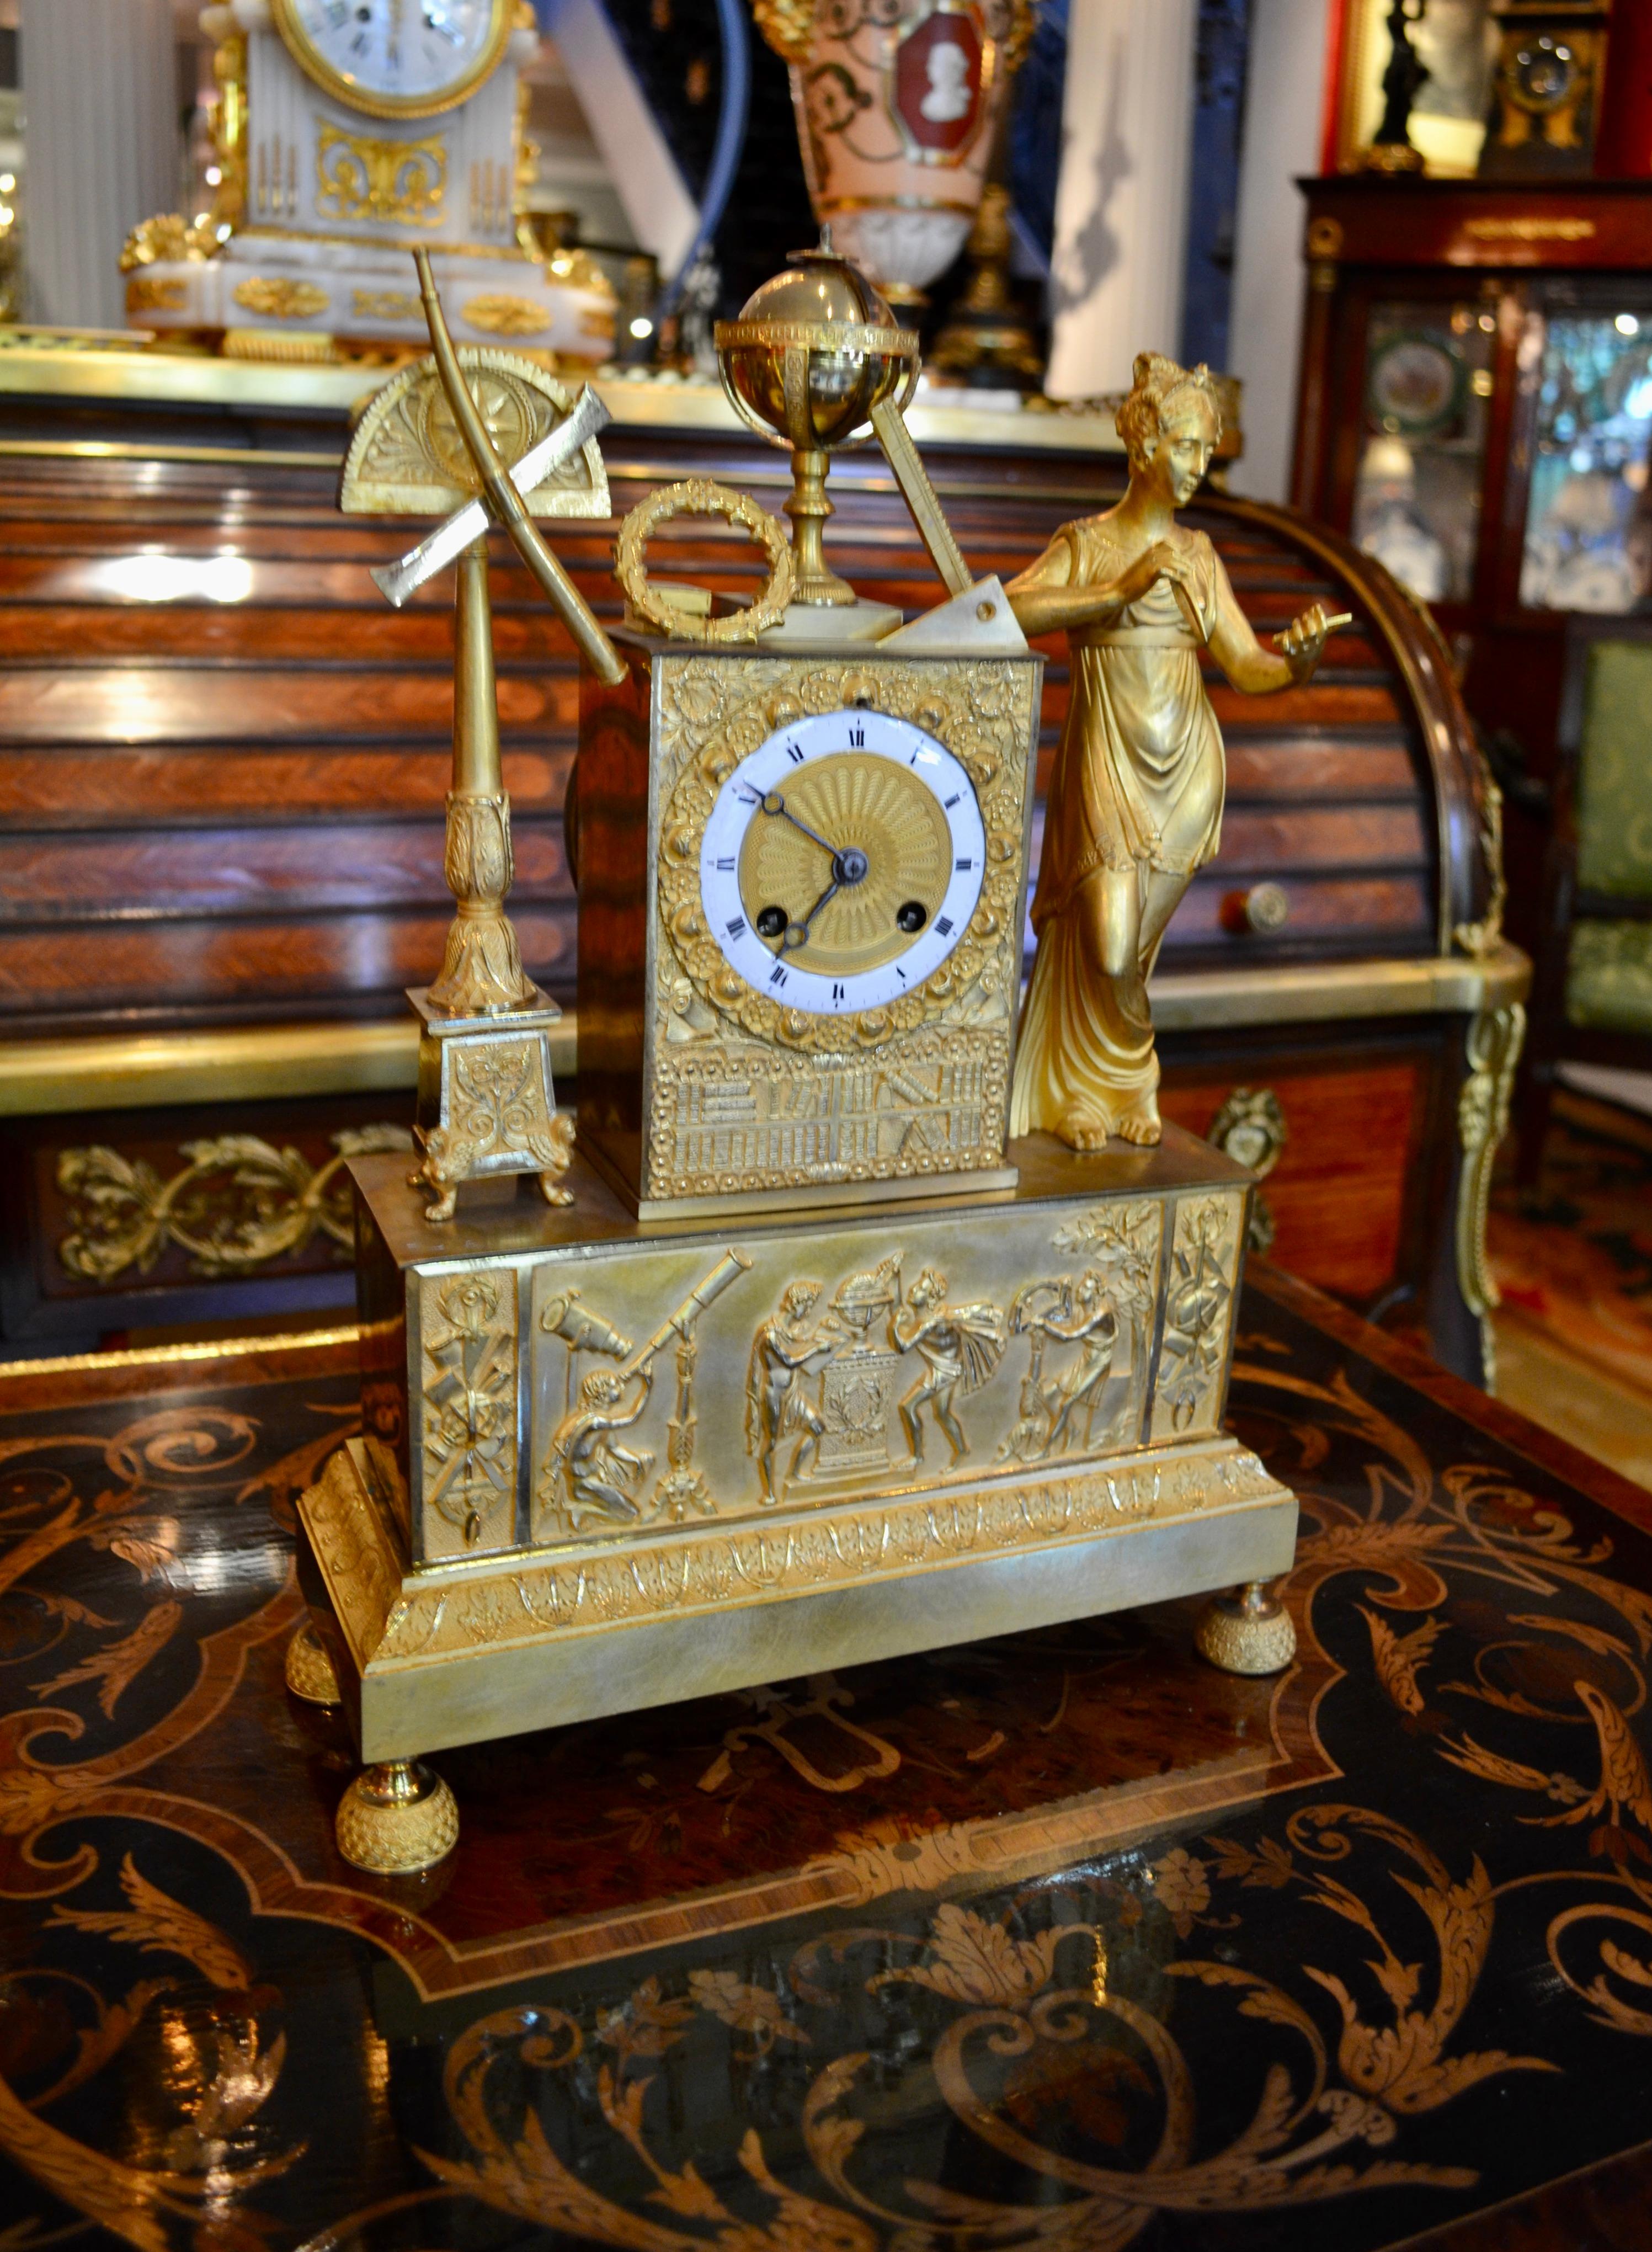 A fine example of a period French Empire mantle clock in finely chased and gilded  bronze made in France in the first quarter of the 19thC.  One of the Greek muses with a star atop her head is shown standing on the base of the clock to the right of